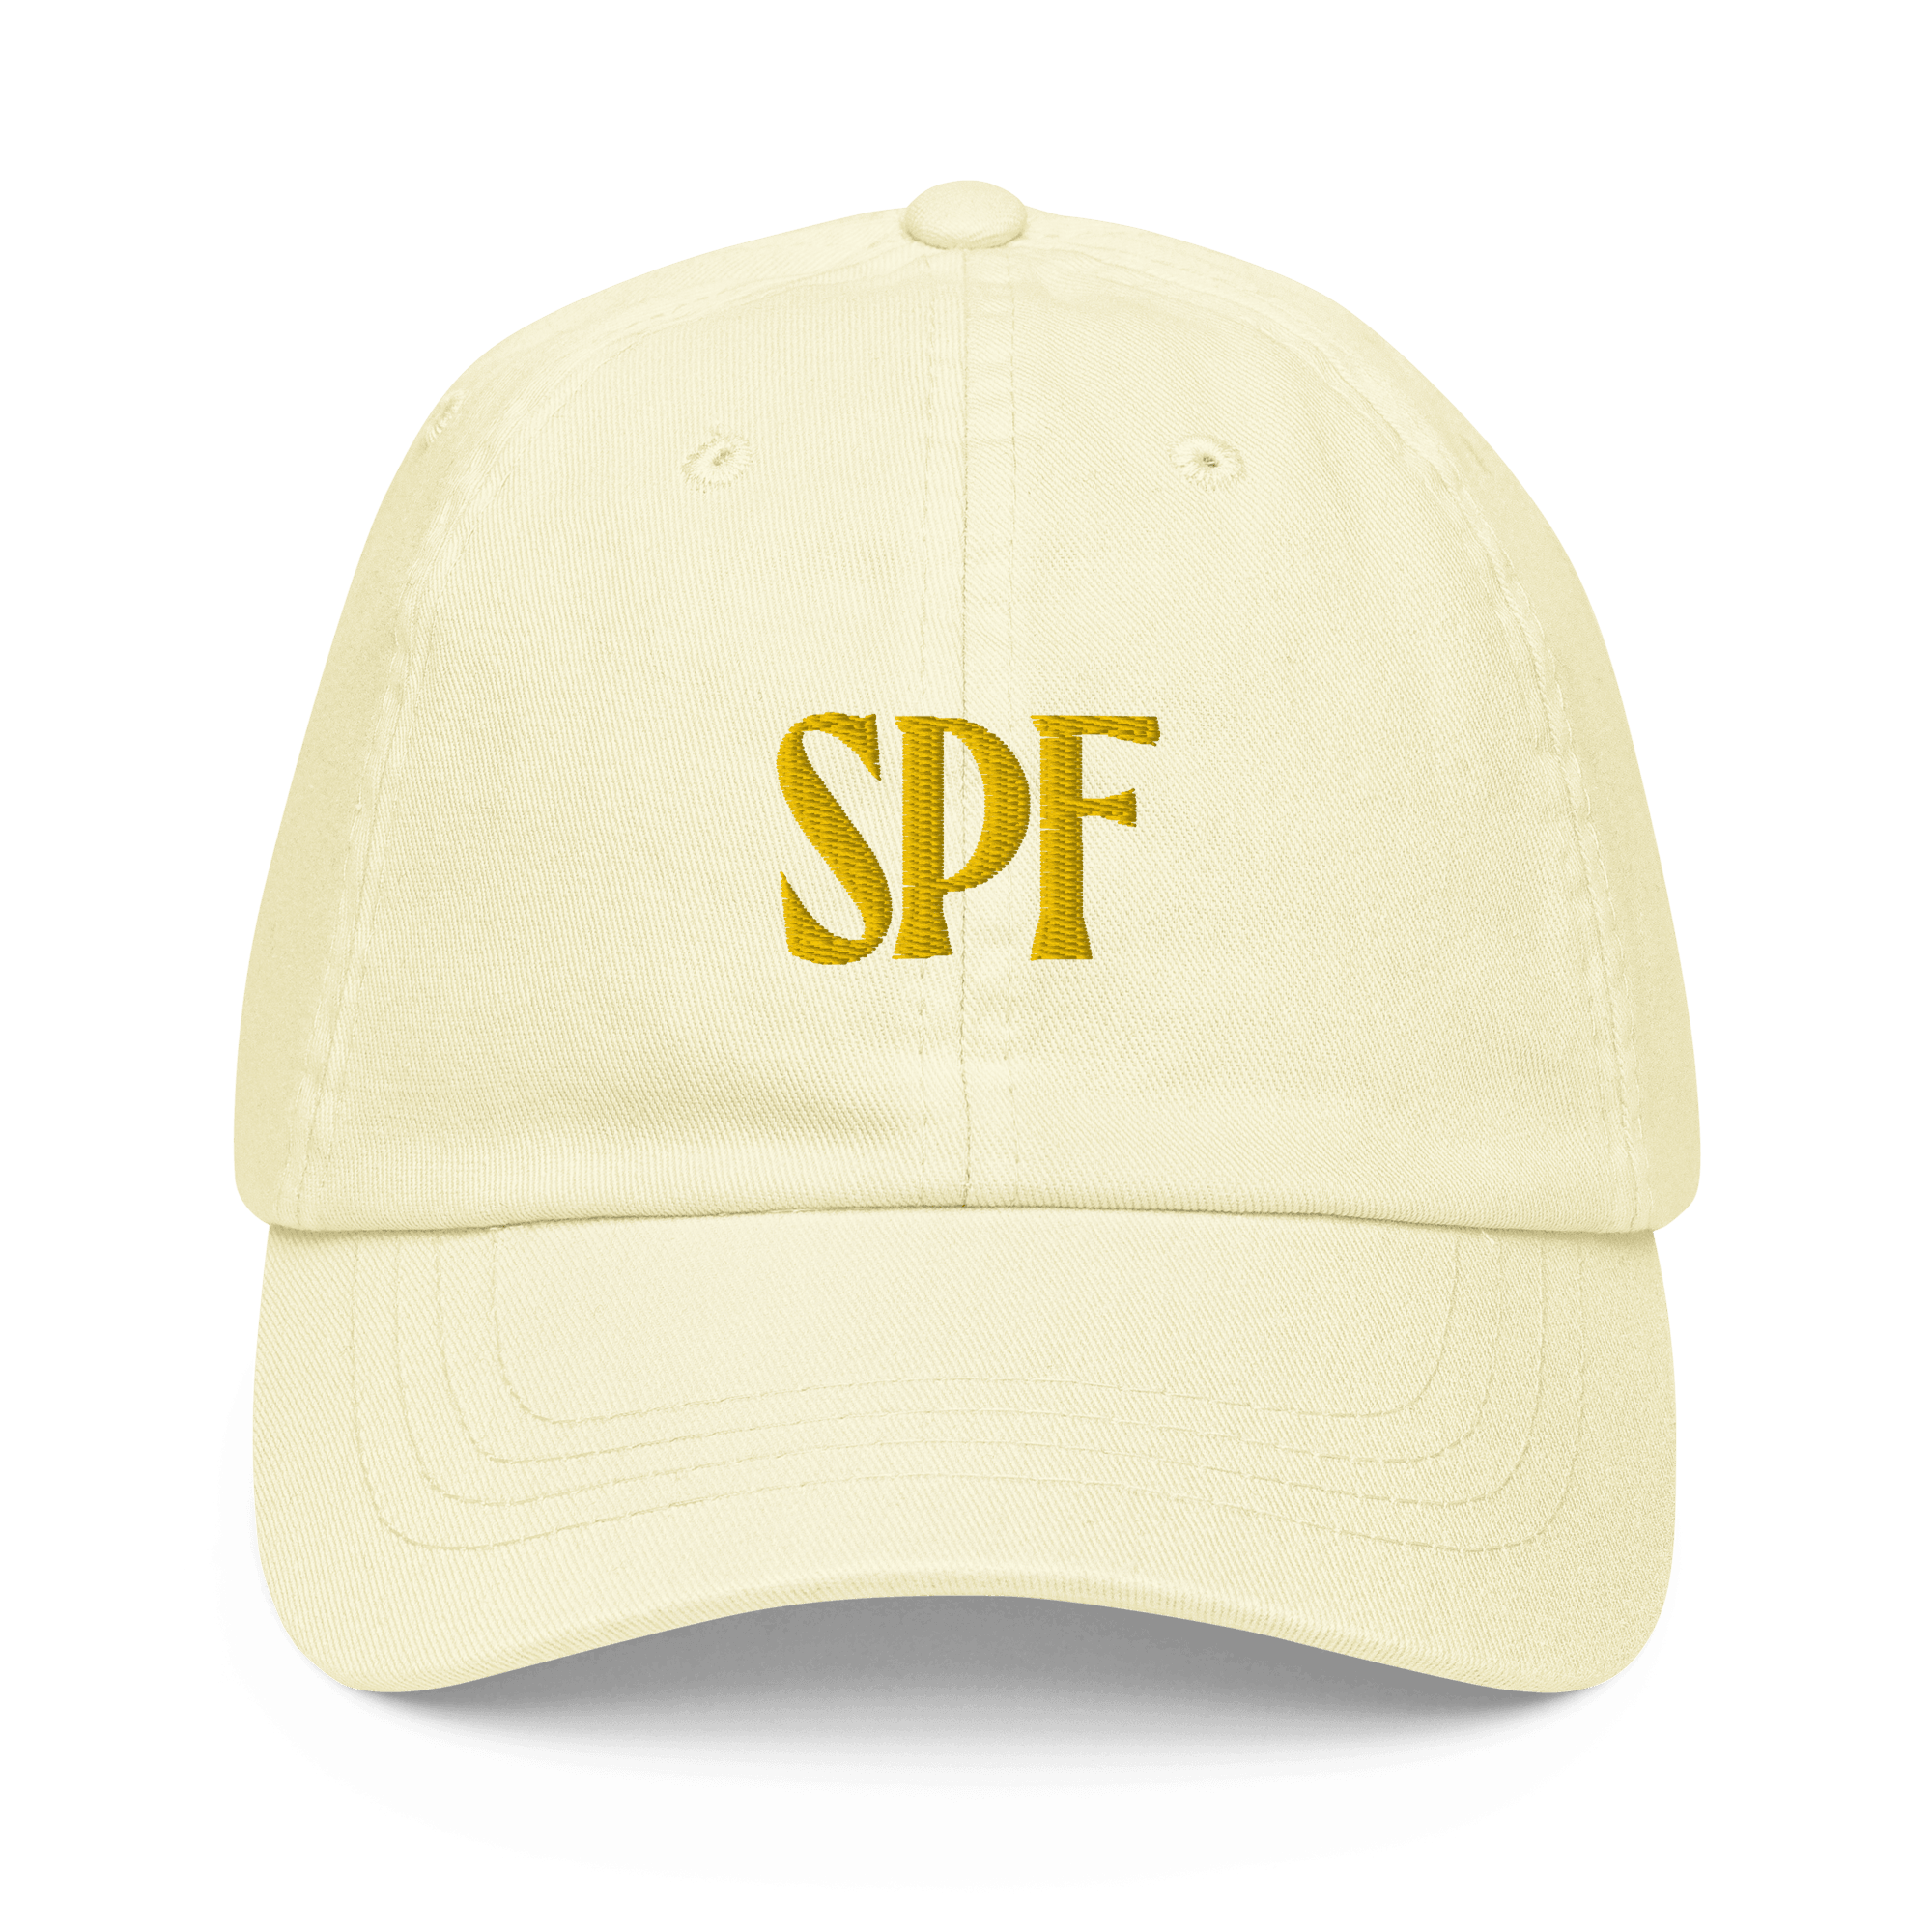 SPF Embroidered Hat - Polychrome Goods 🍊